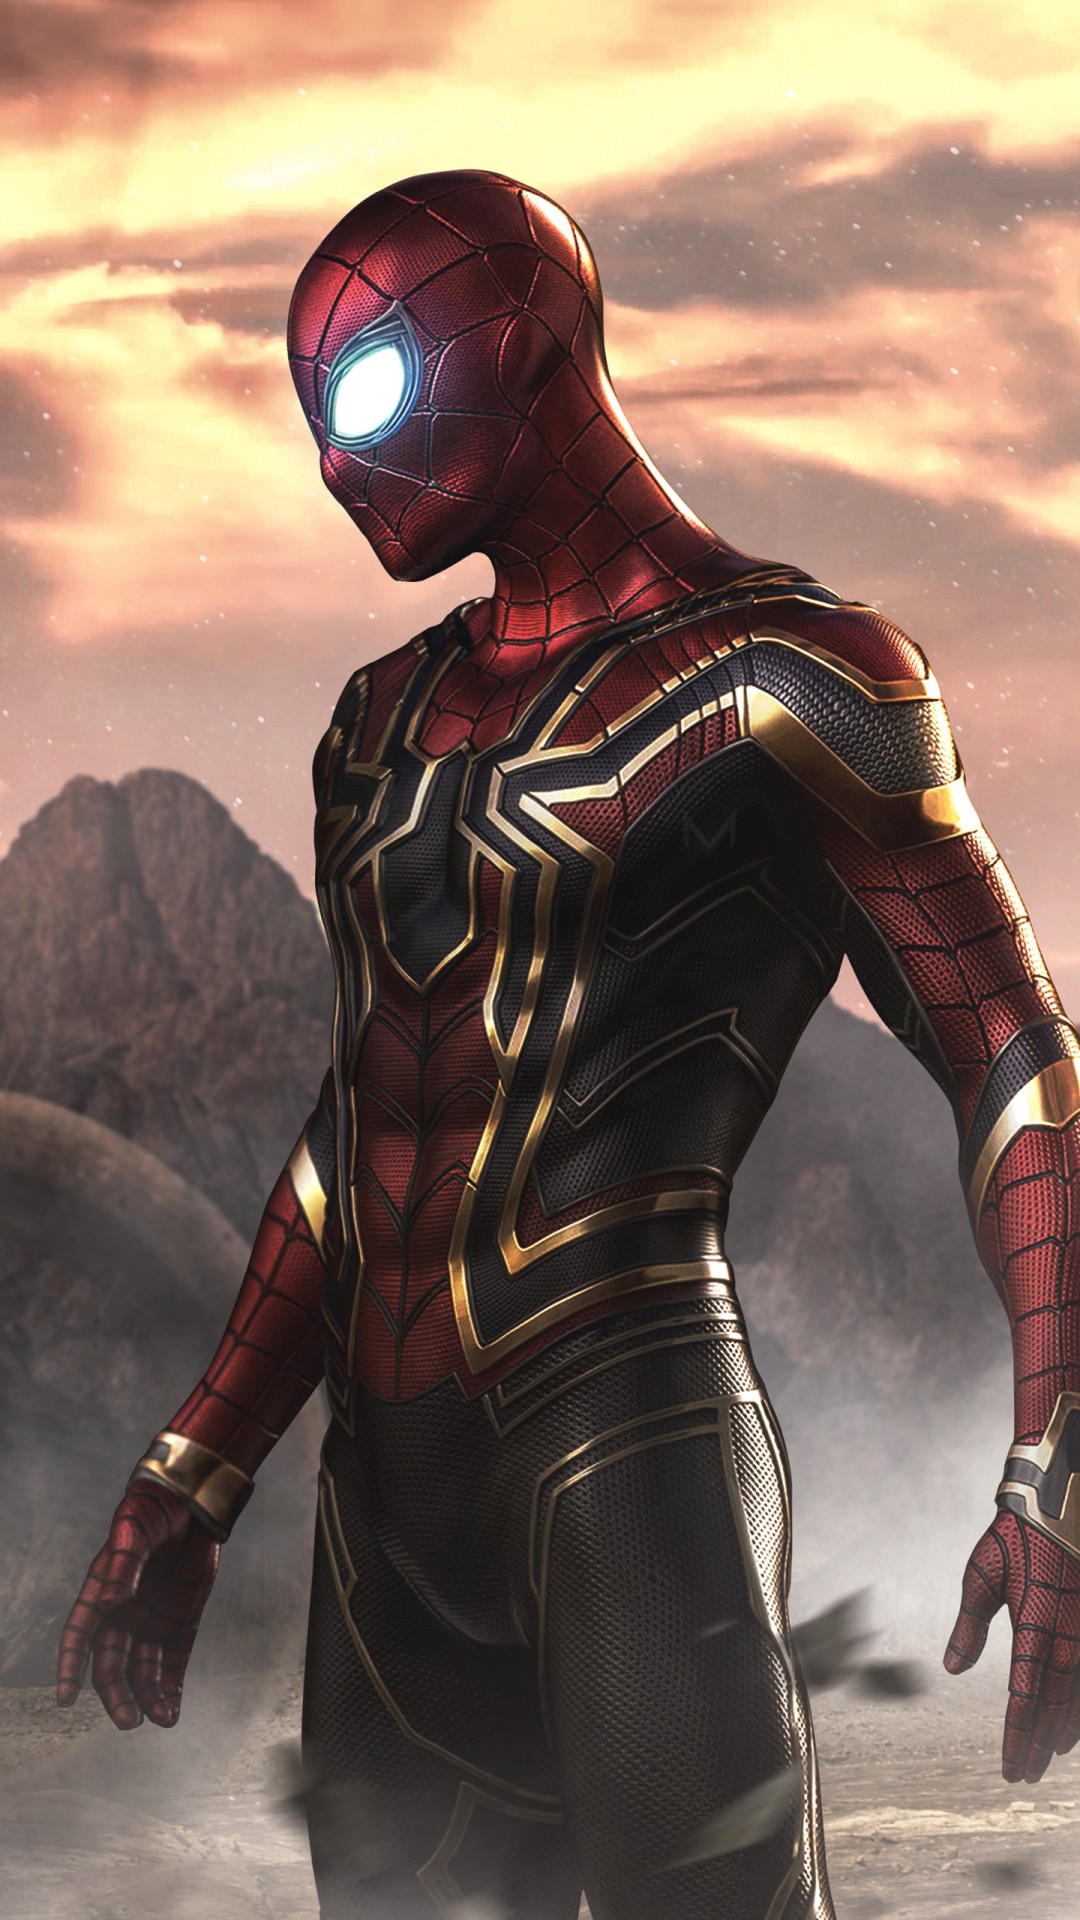 spiderman HD wallpaper for android, superhero, fictional character, suit actor, hero, iron man